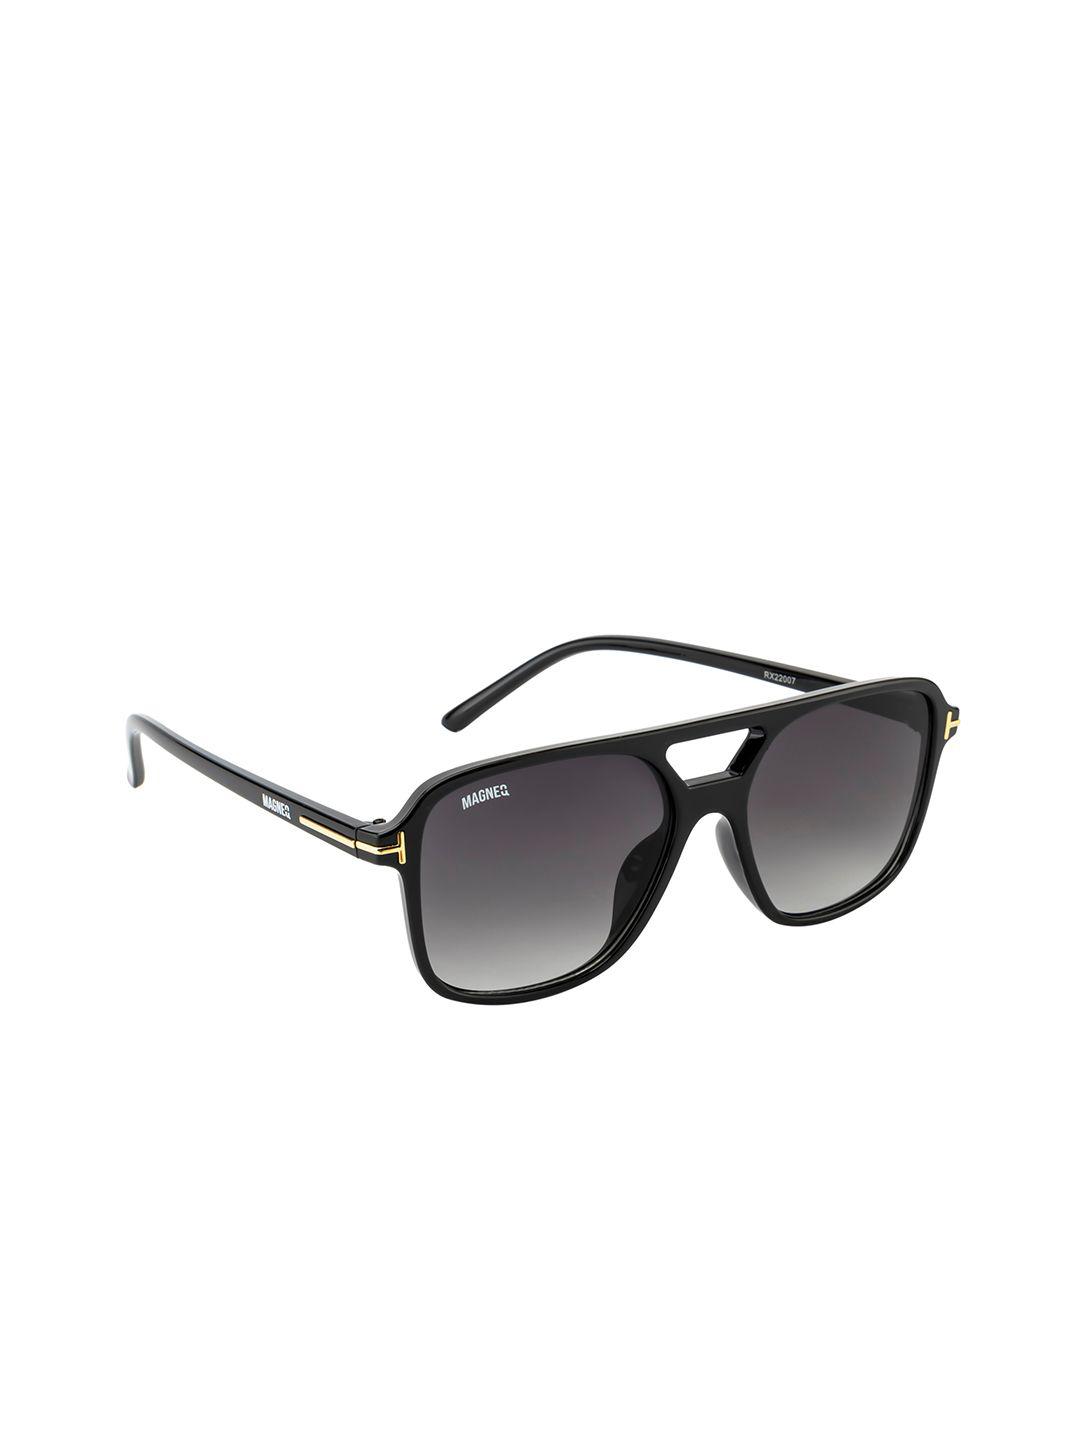 magneq lens & aviator sunglasses with polarised & uv protected lens mg 2207/s c4 5518